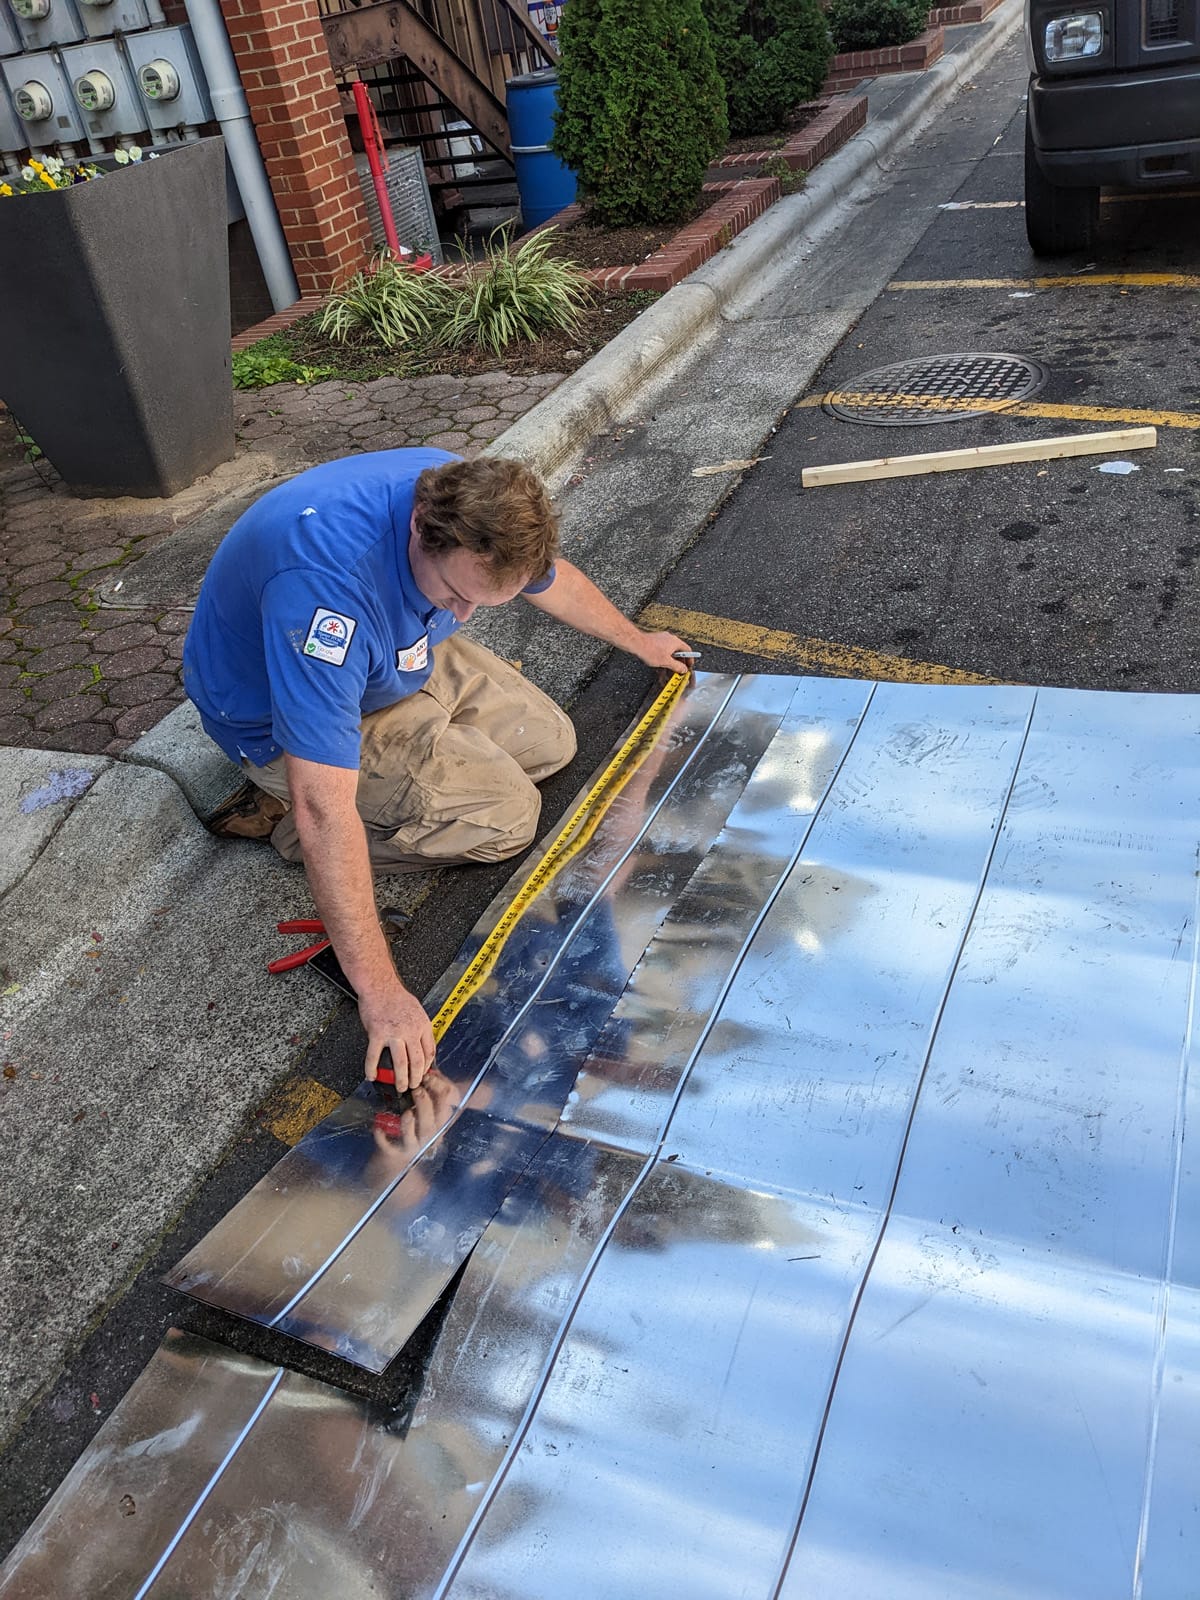 A worker measuring and marking a piece of metal ductwork on the ground for cutting or installation.